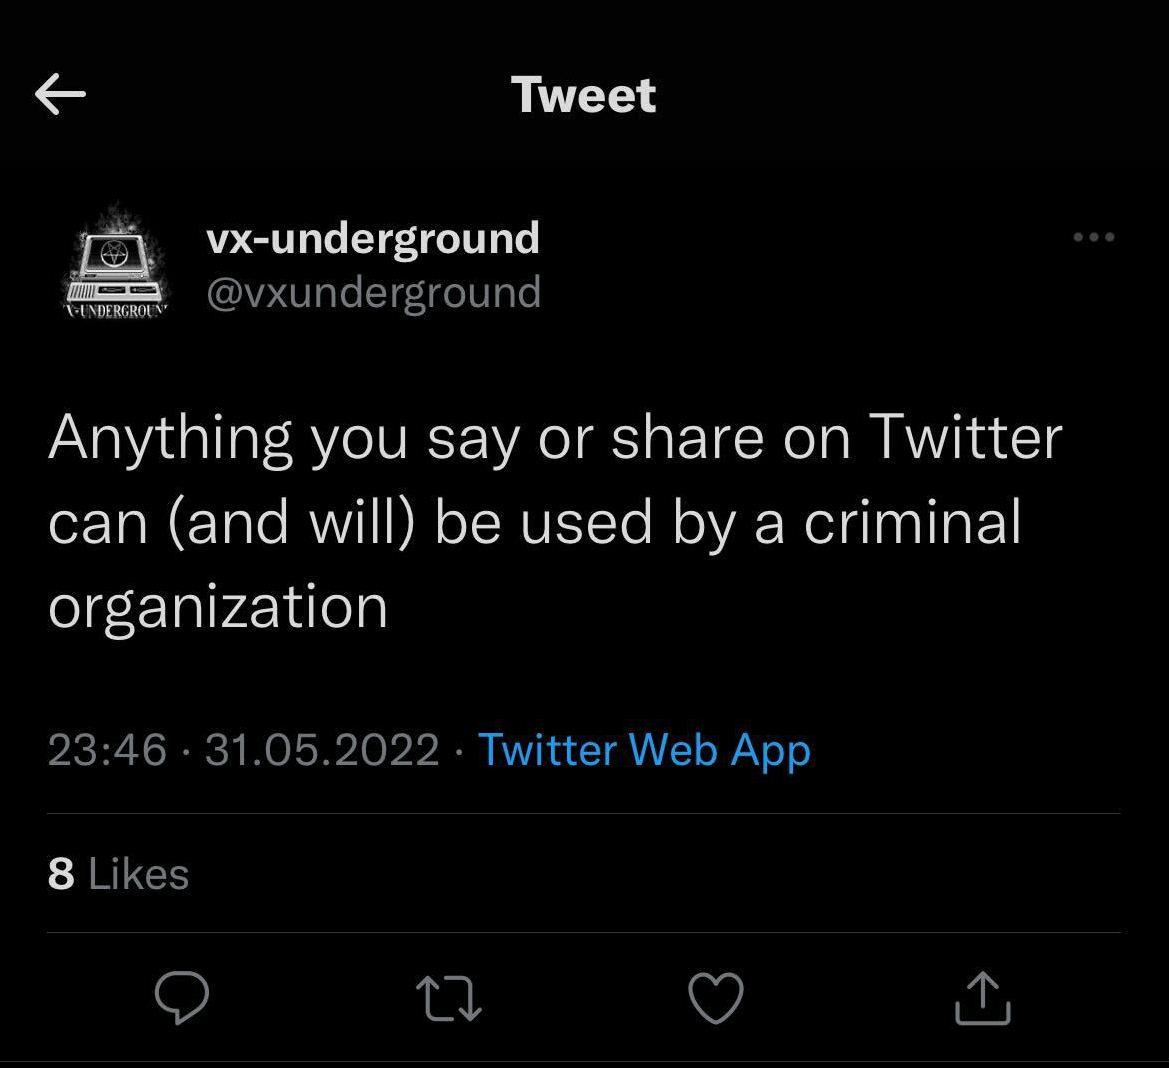 Anything you say or share on Twitter can (and will) be used by a criminal organization